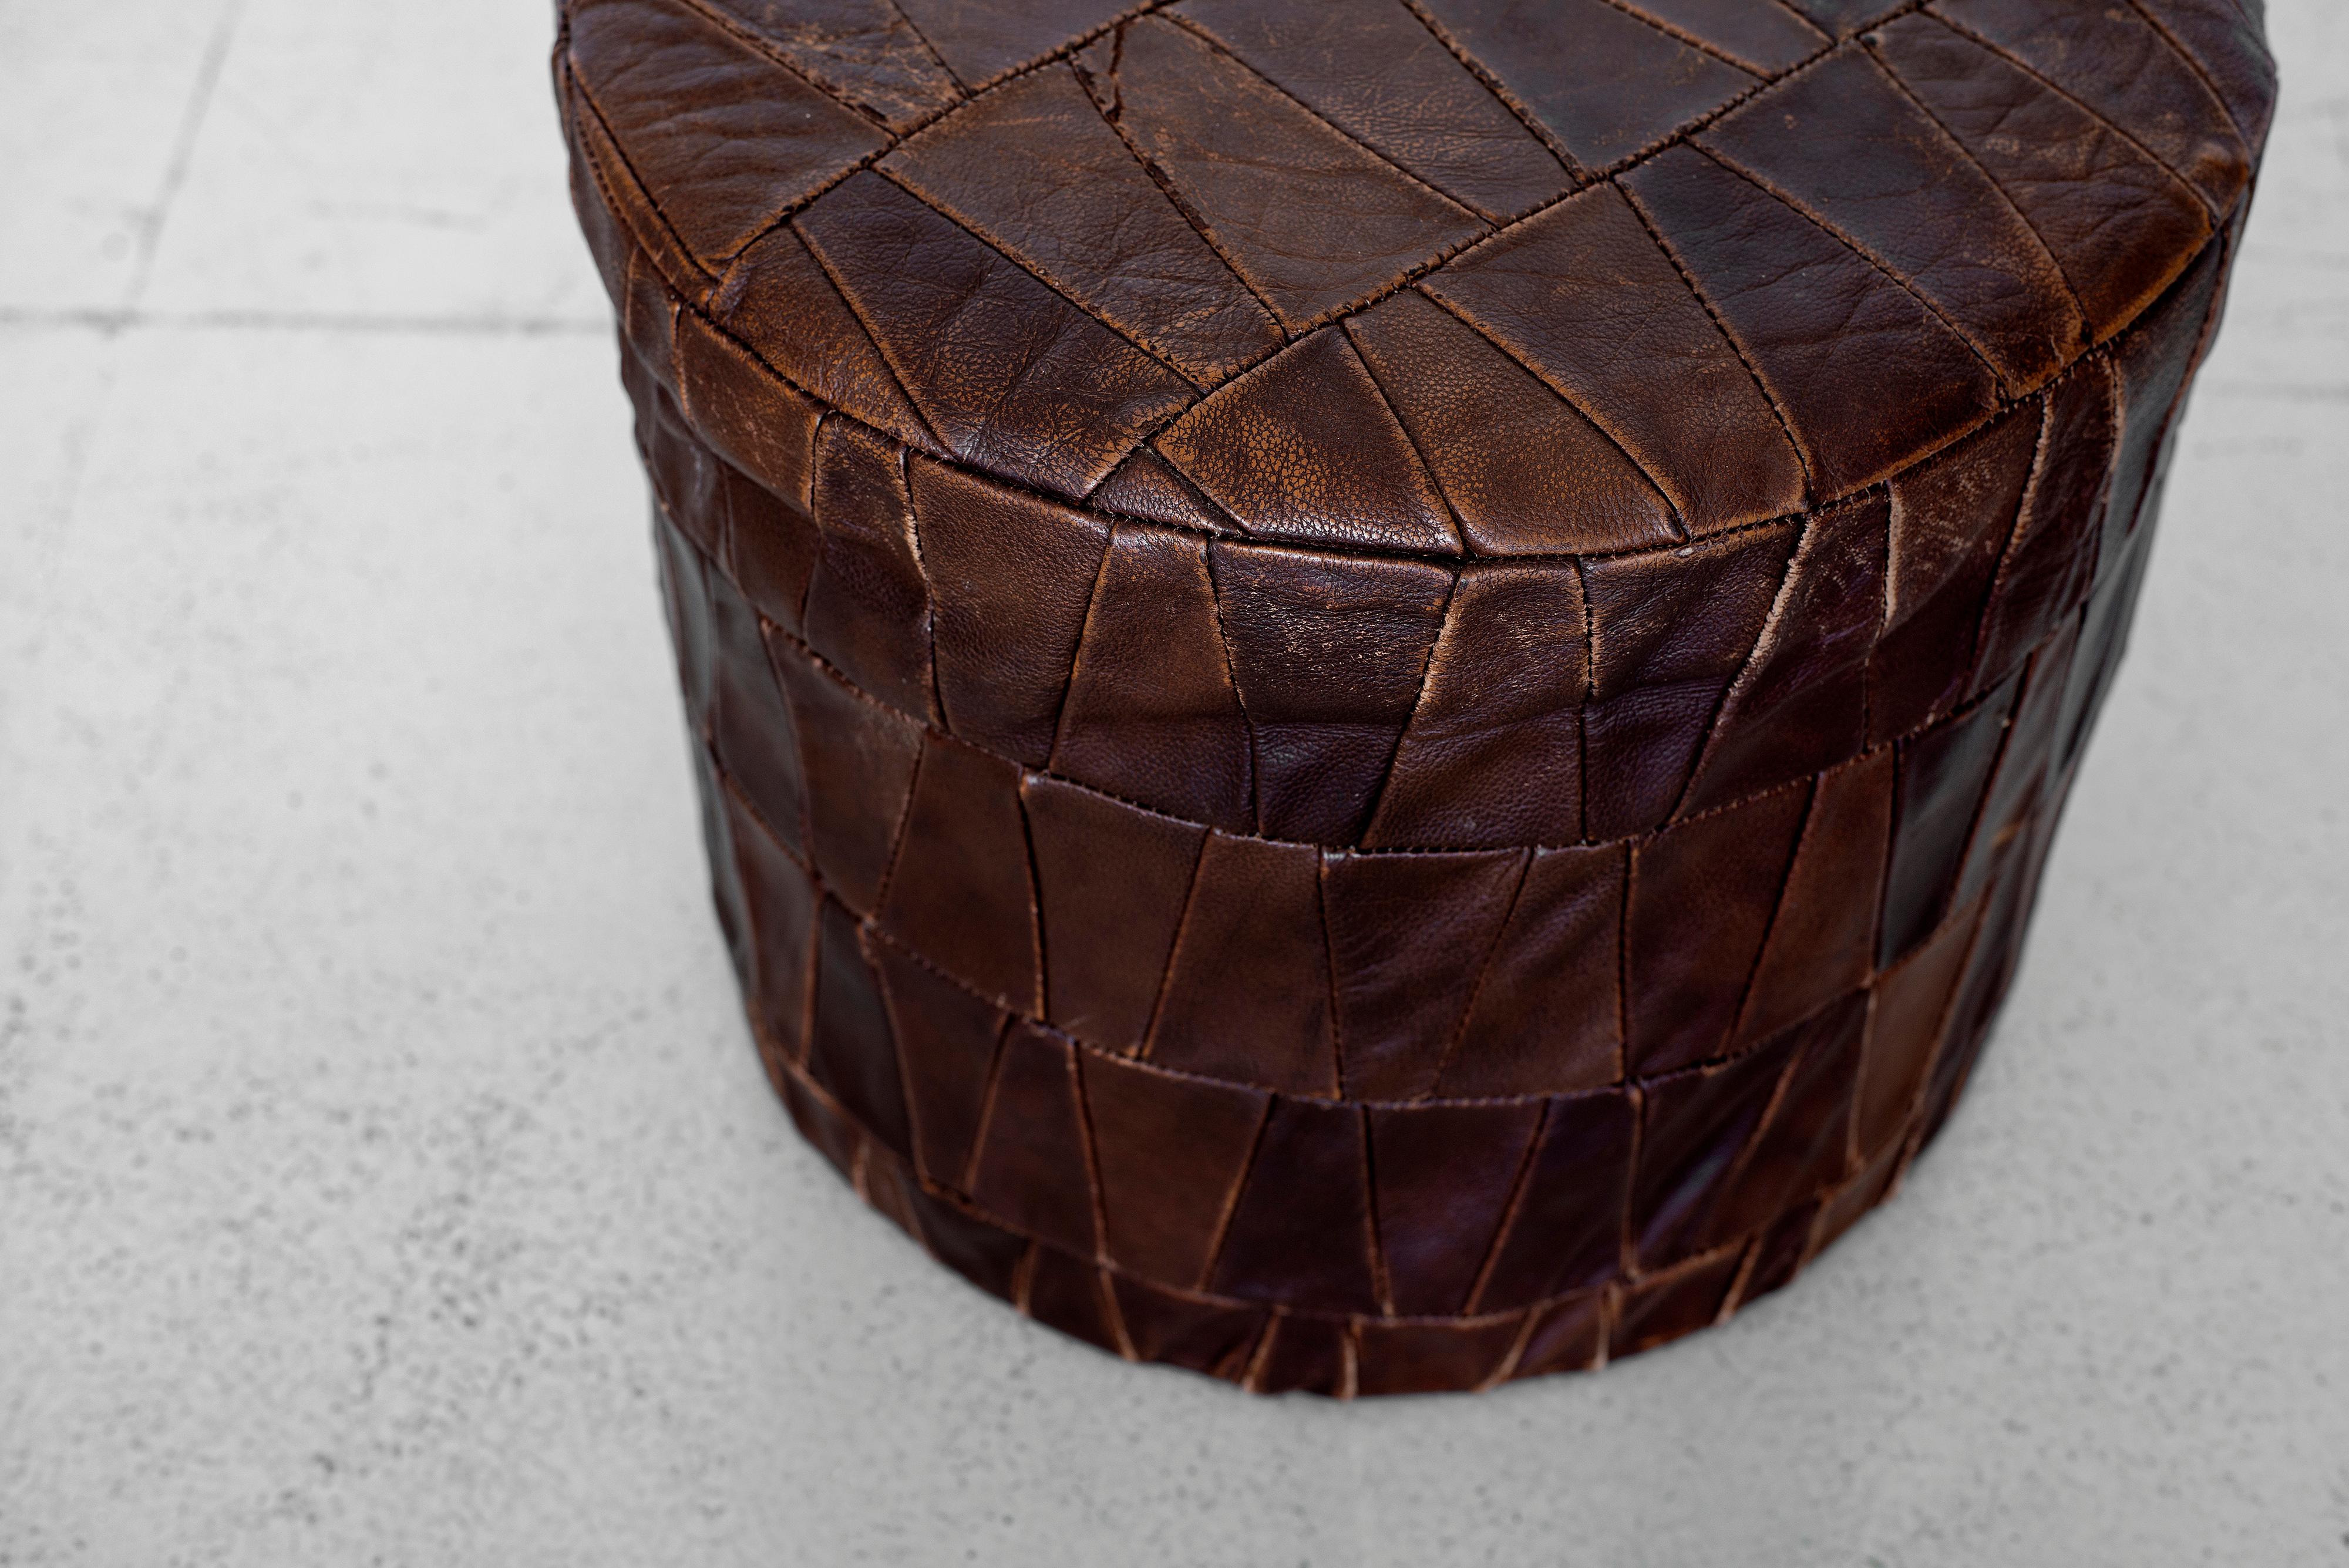 Great vintage leather ottoman by De Sede. Original brown leather patches with nice aged patina and coloring.